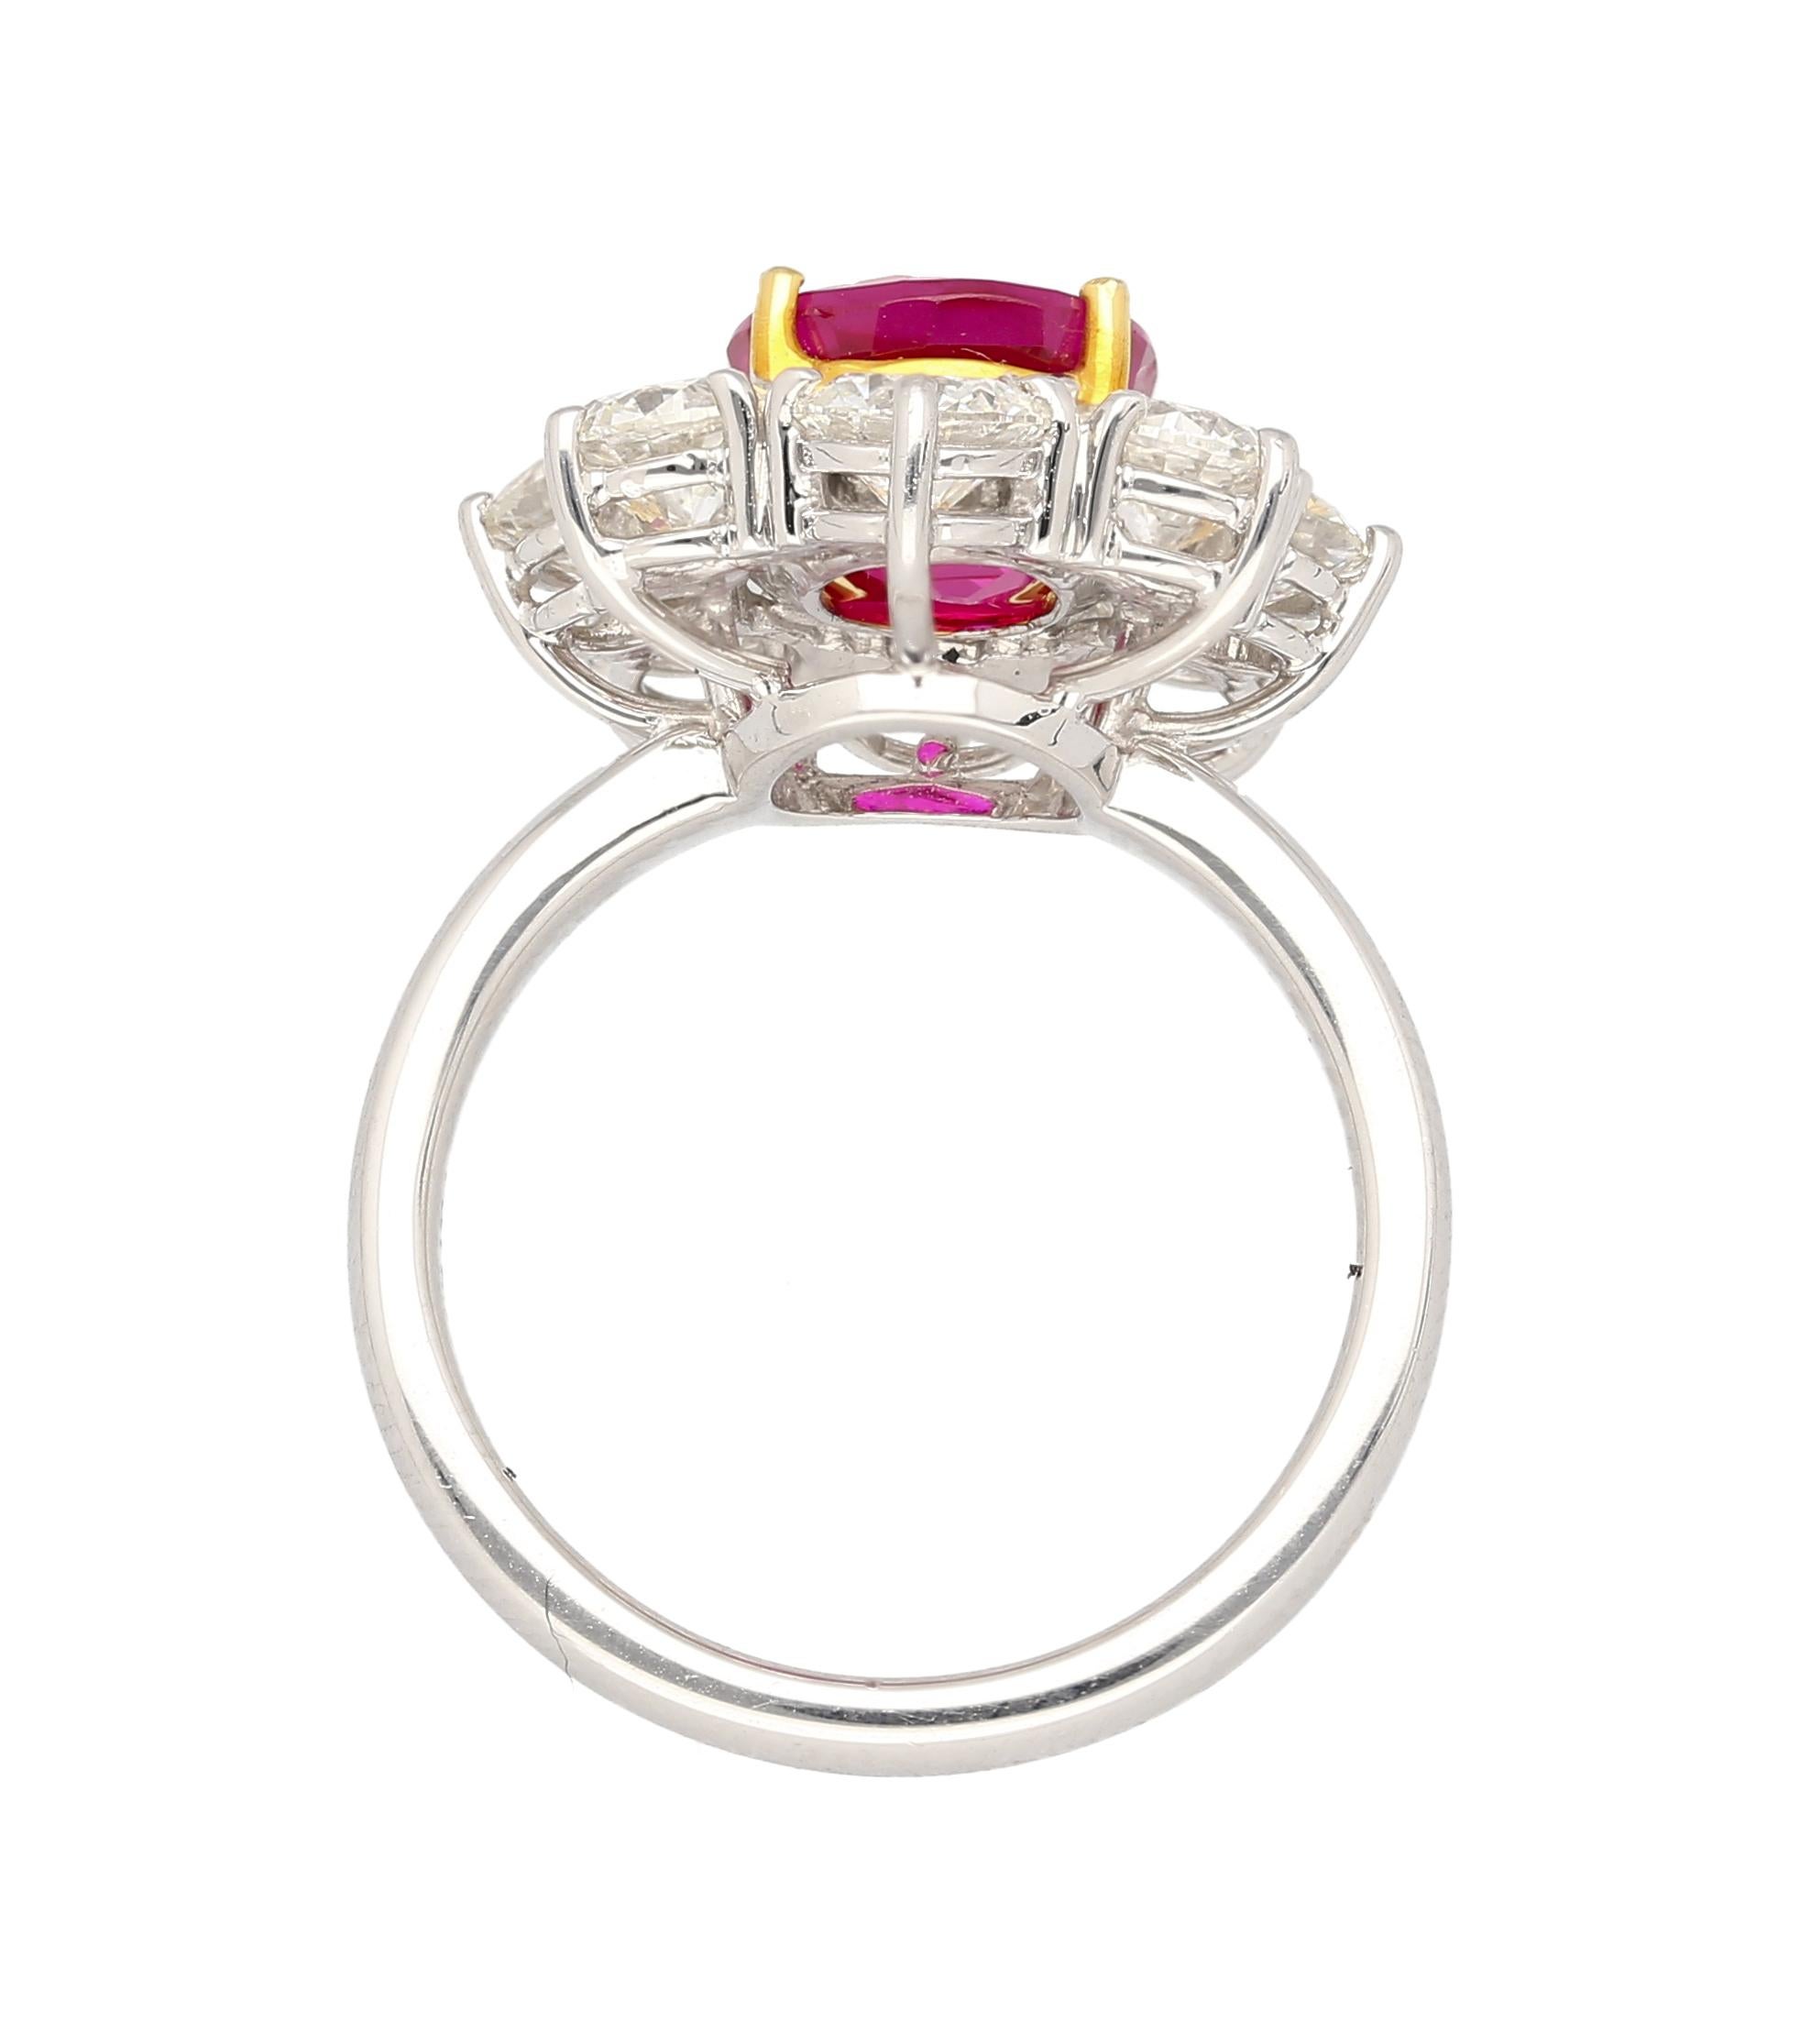 AGL Certified 3.8 Carat Oval No Heat Burma Ruby Ring & Diamond Halo in Platinum For Sale 2